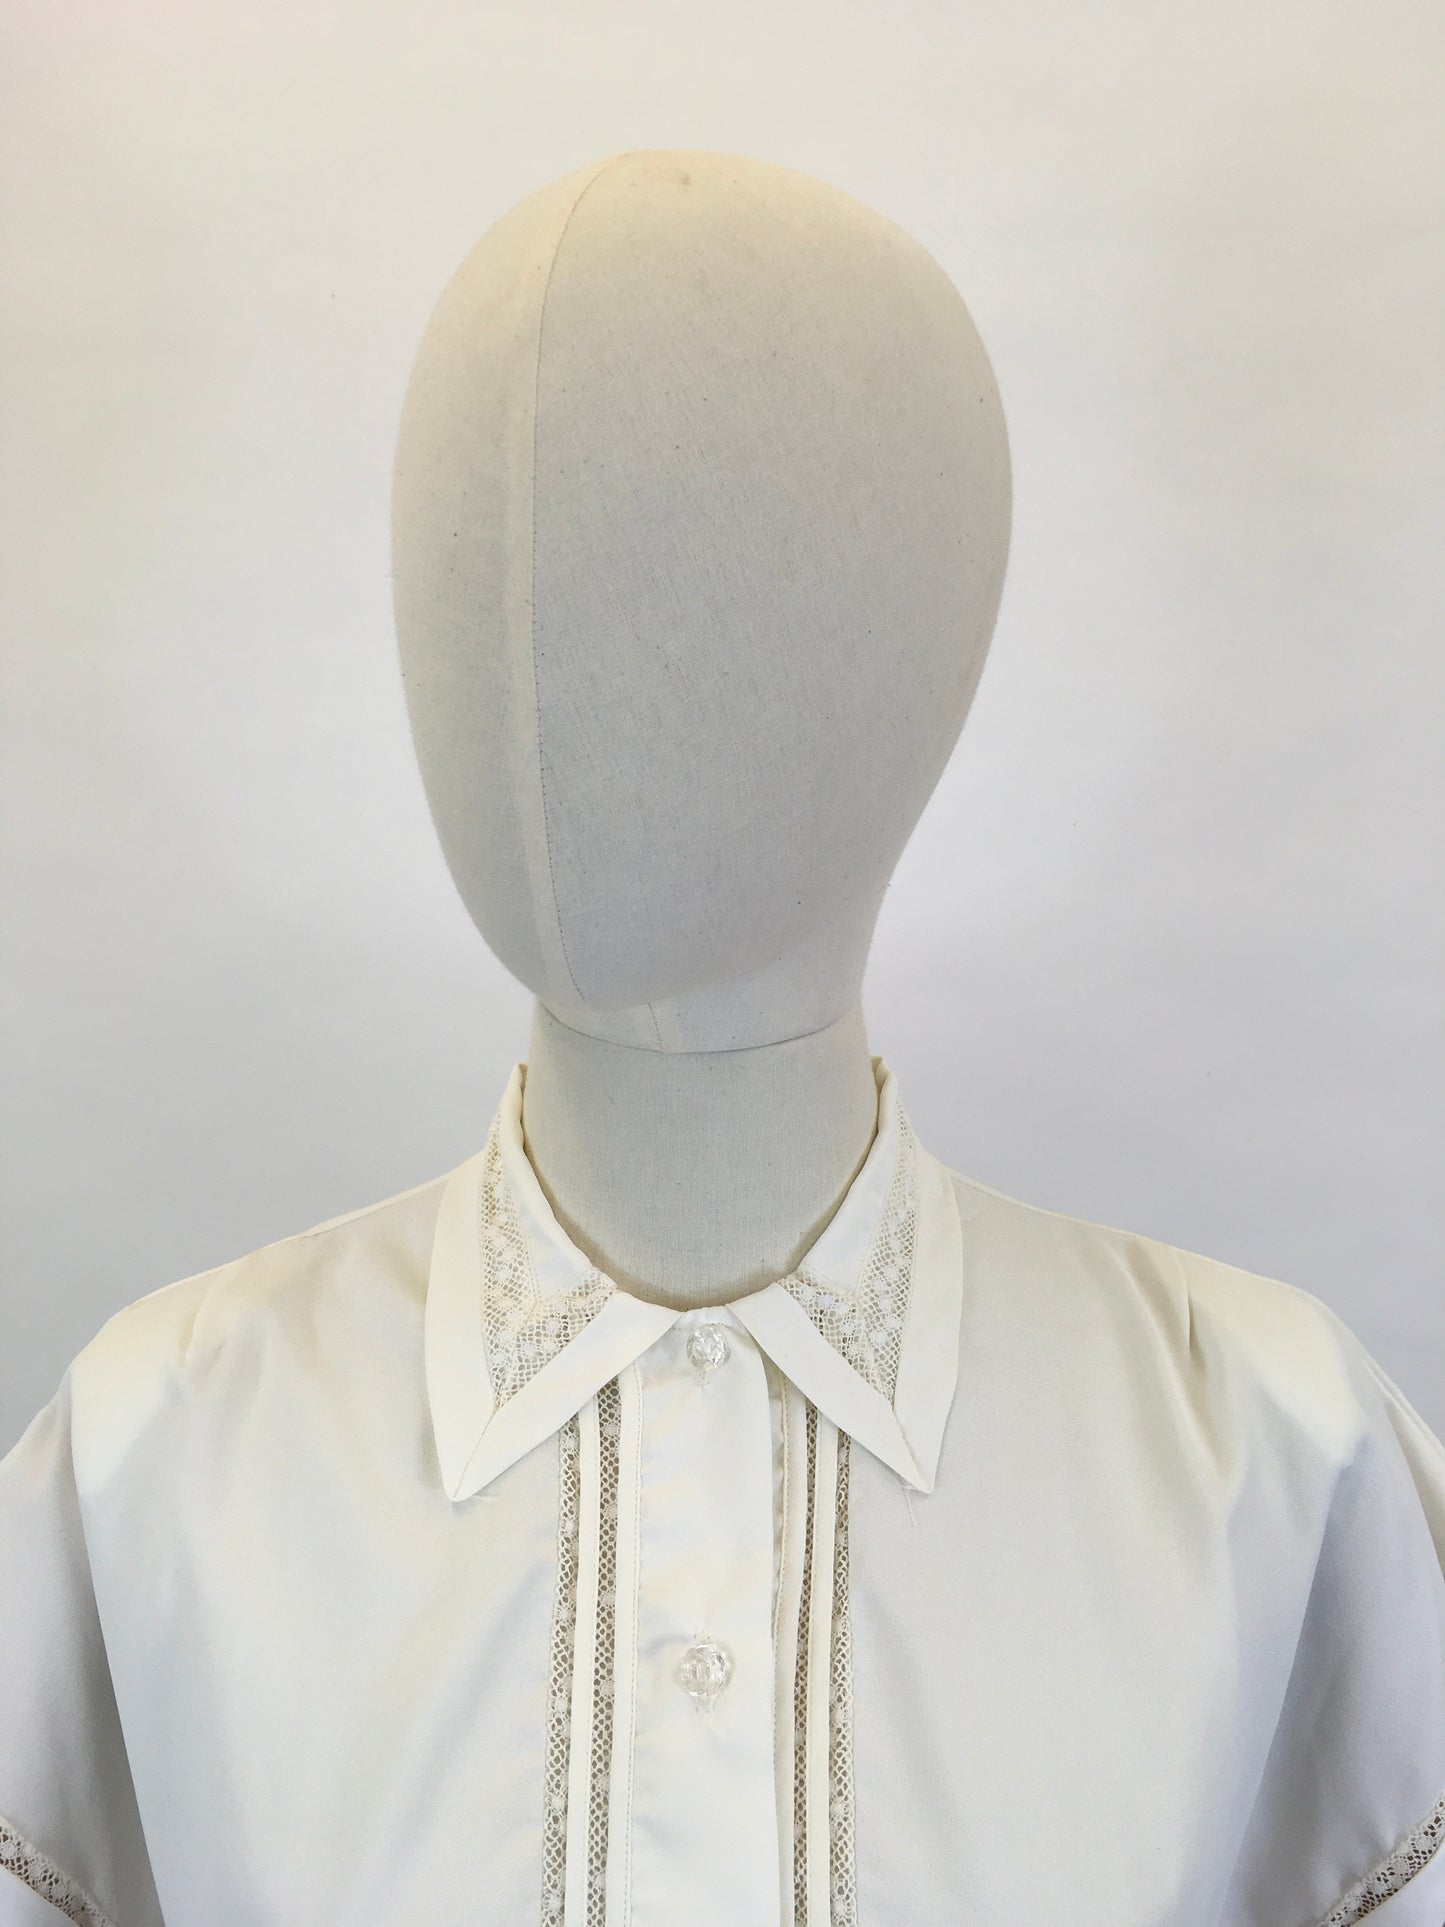 Original 1950’s ‘ Weber’ Blouse in Crisp White - Featuring Lace and Pintuck Detailing to the Bodice